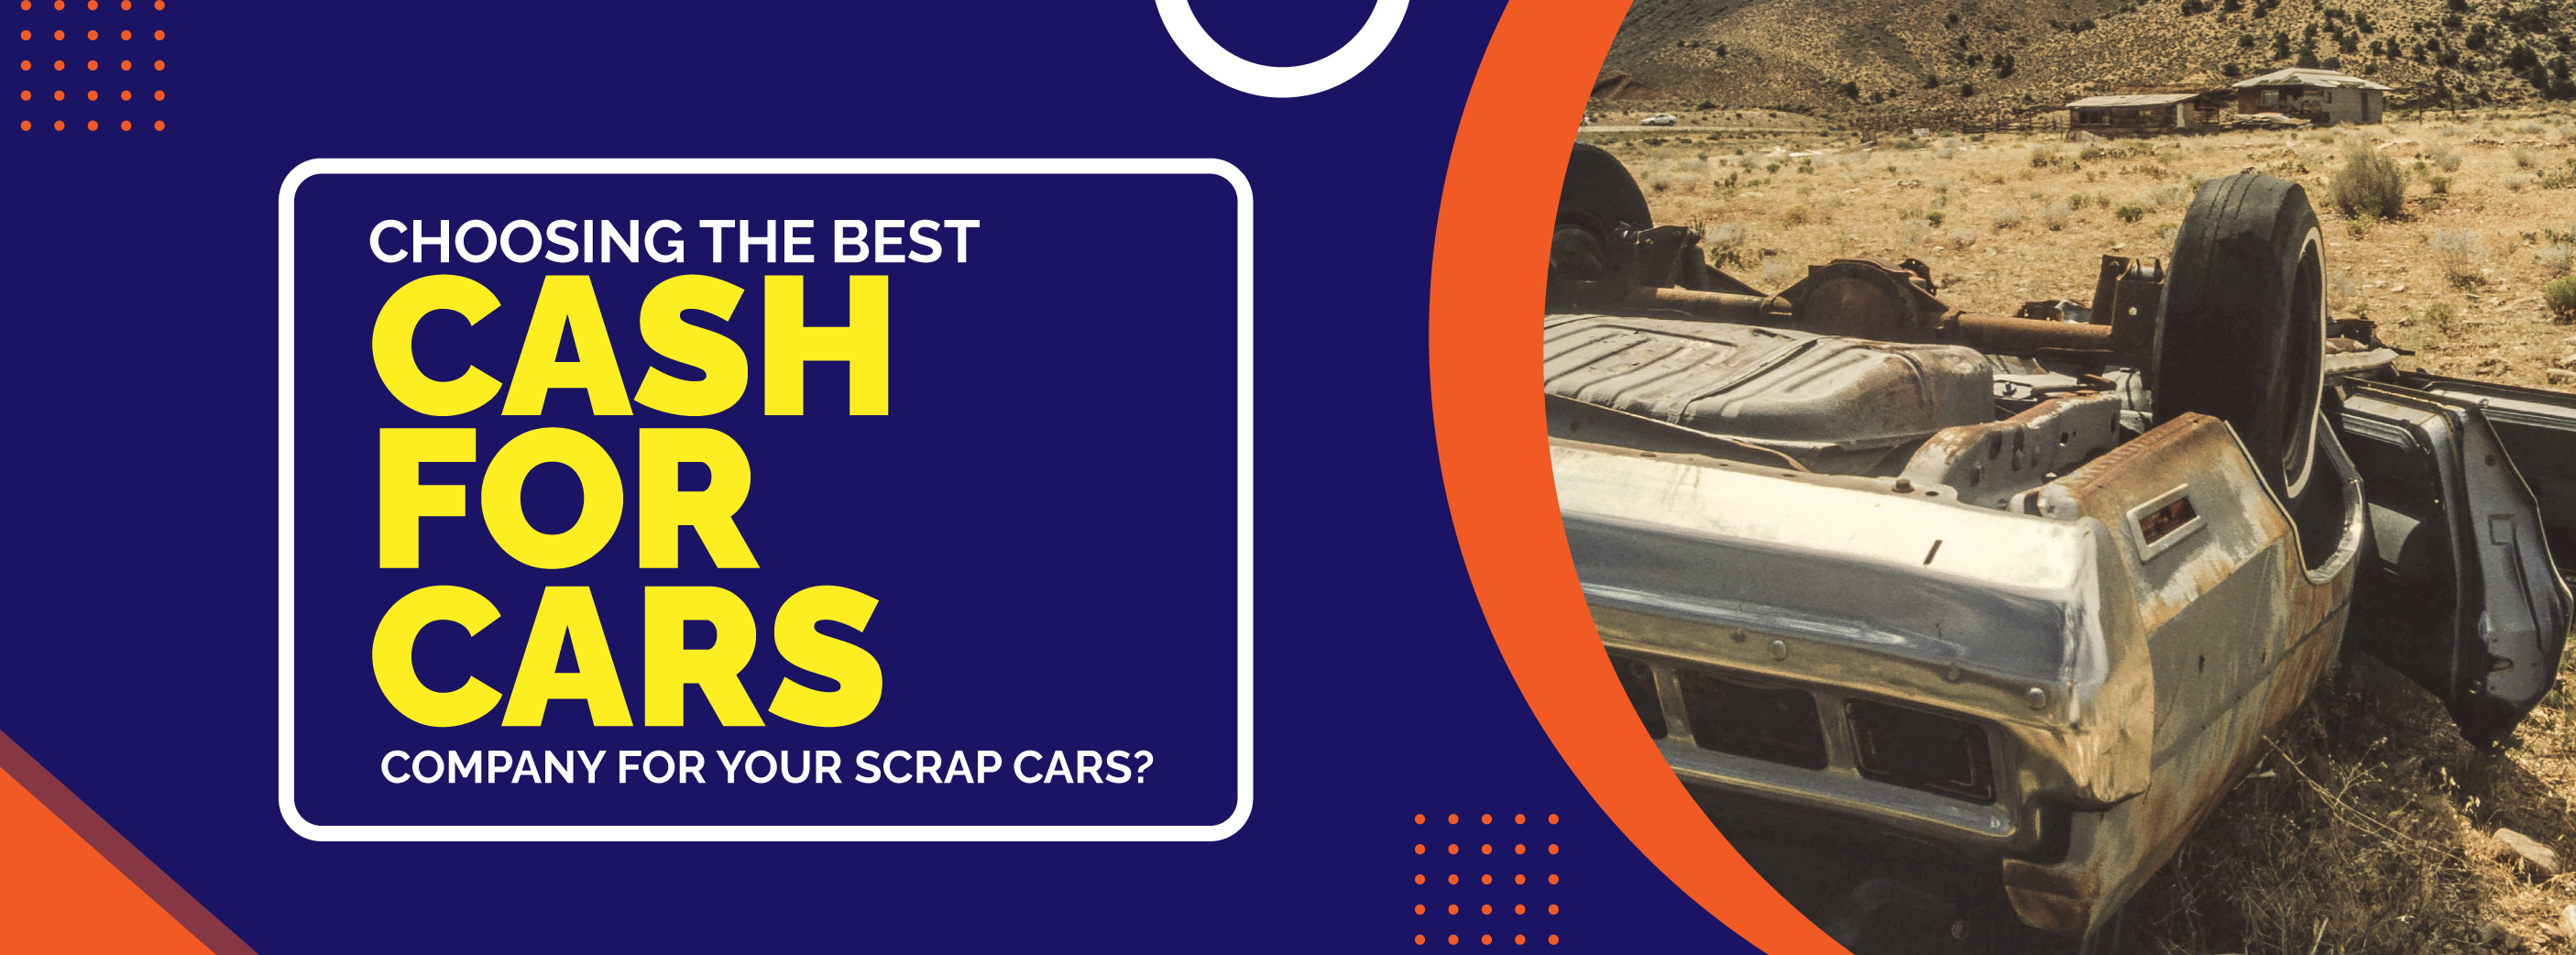 Choosing The Best Cash for Cars Company For Your Scrap Cars